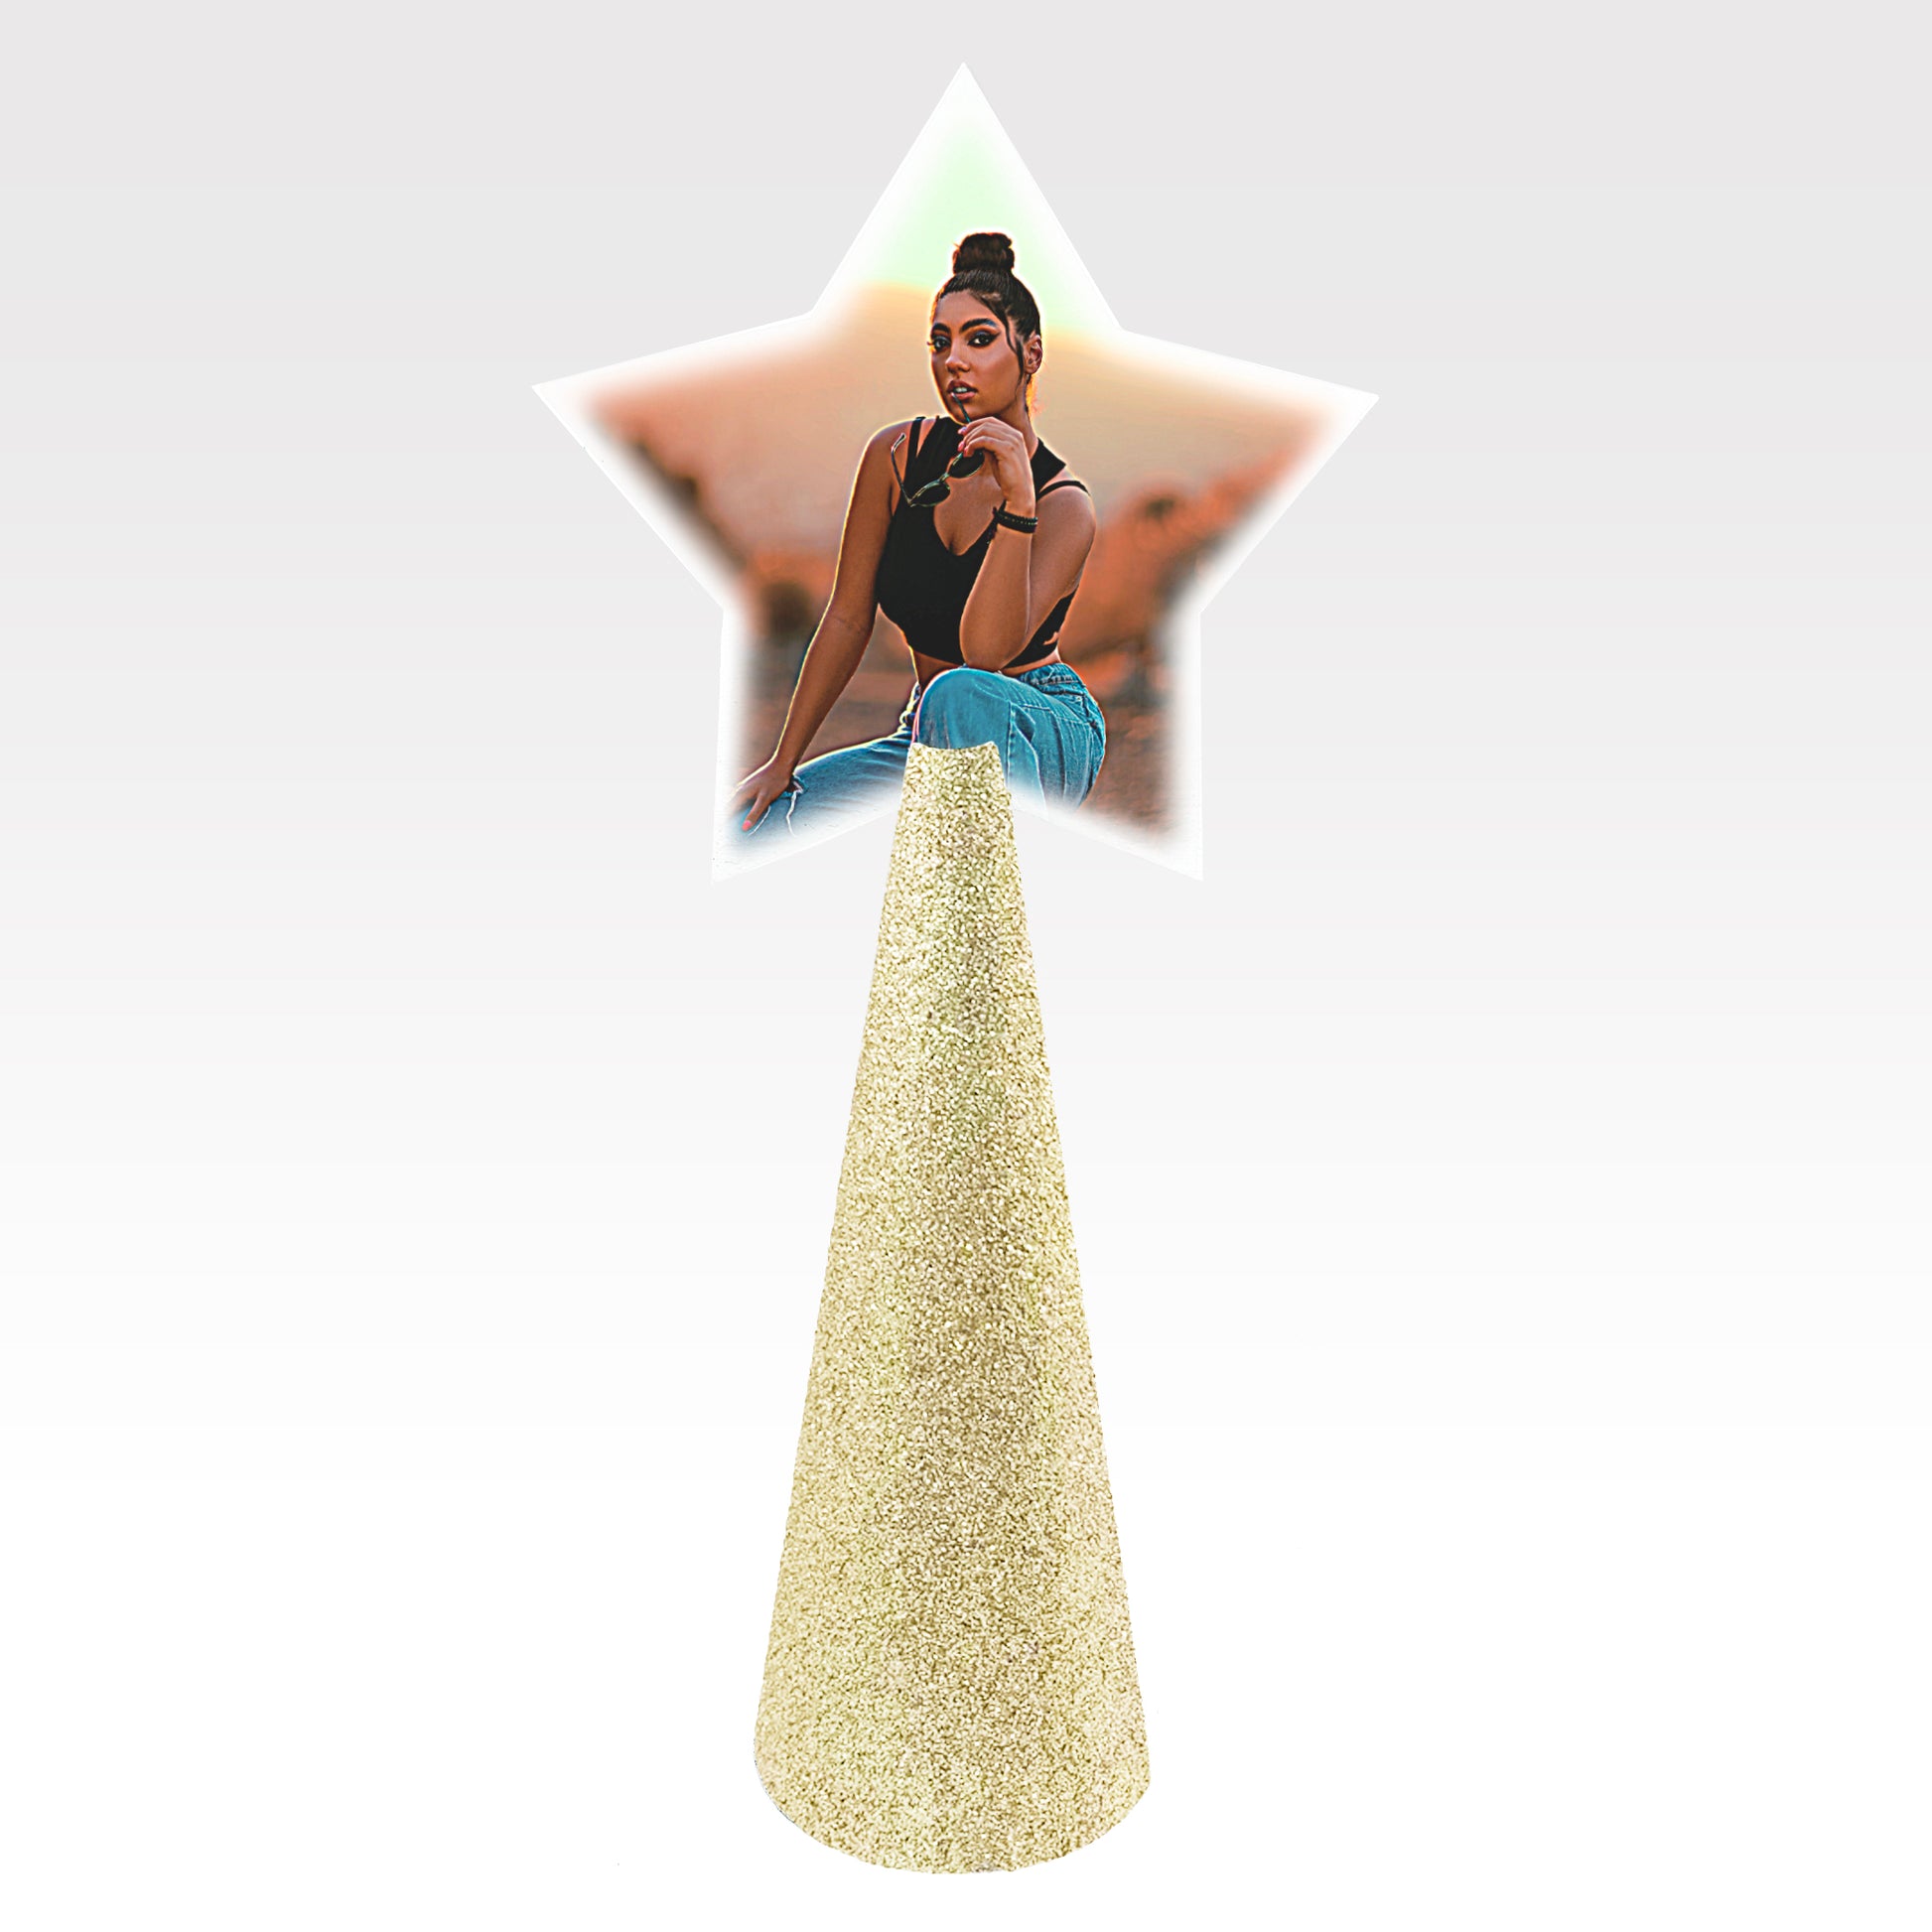 Custom tree topper - White Star with sample photo of woman in desert - champagne gold glitter cone